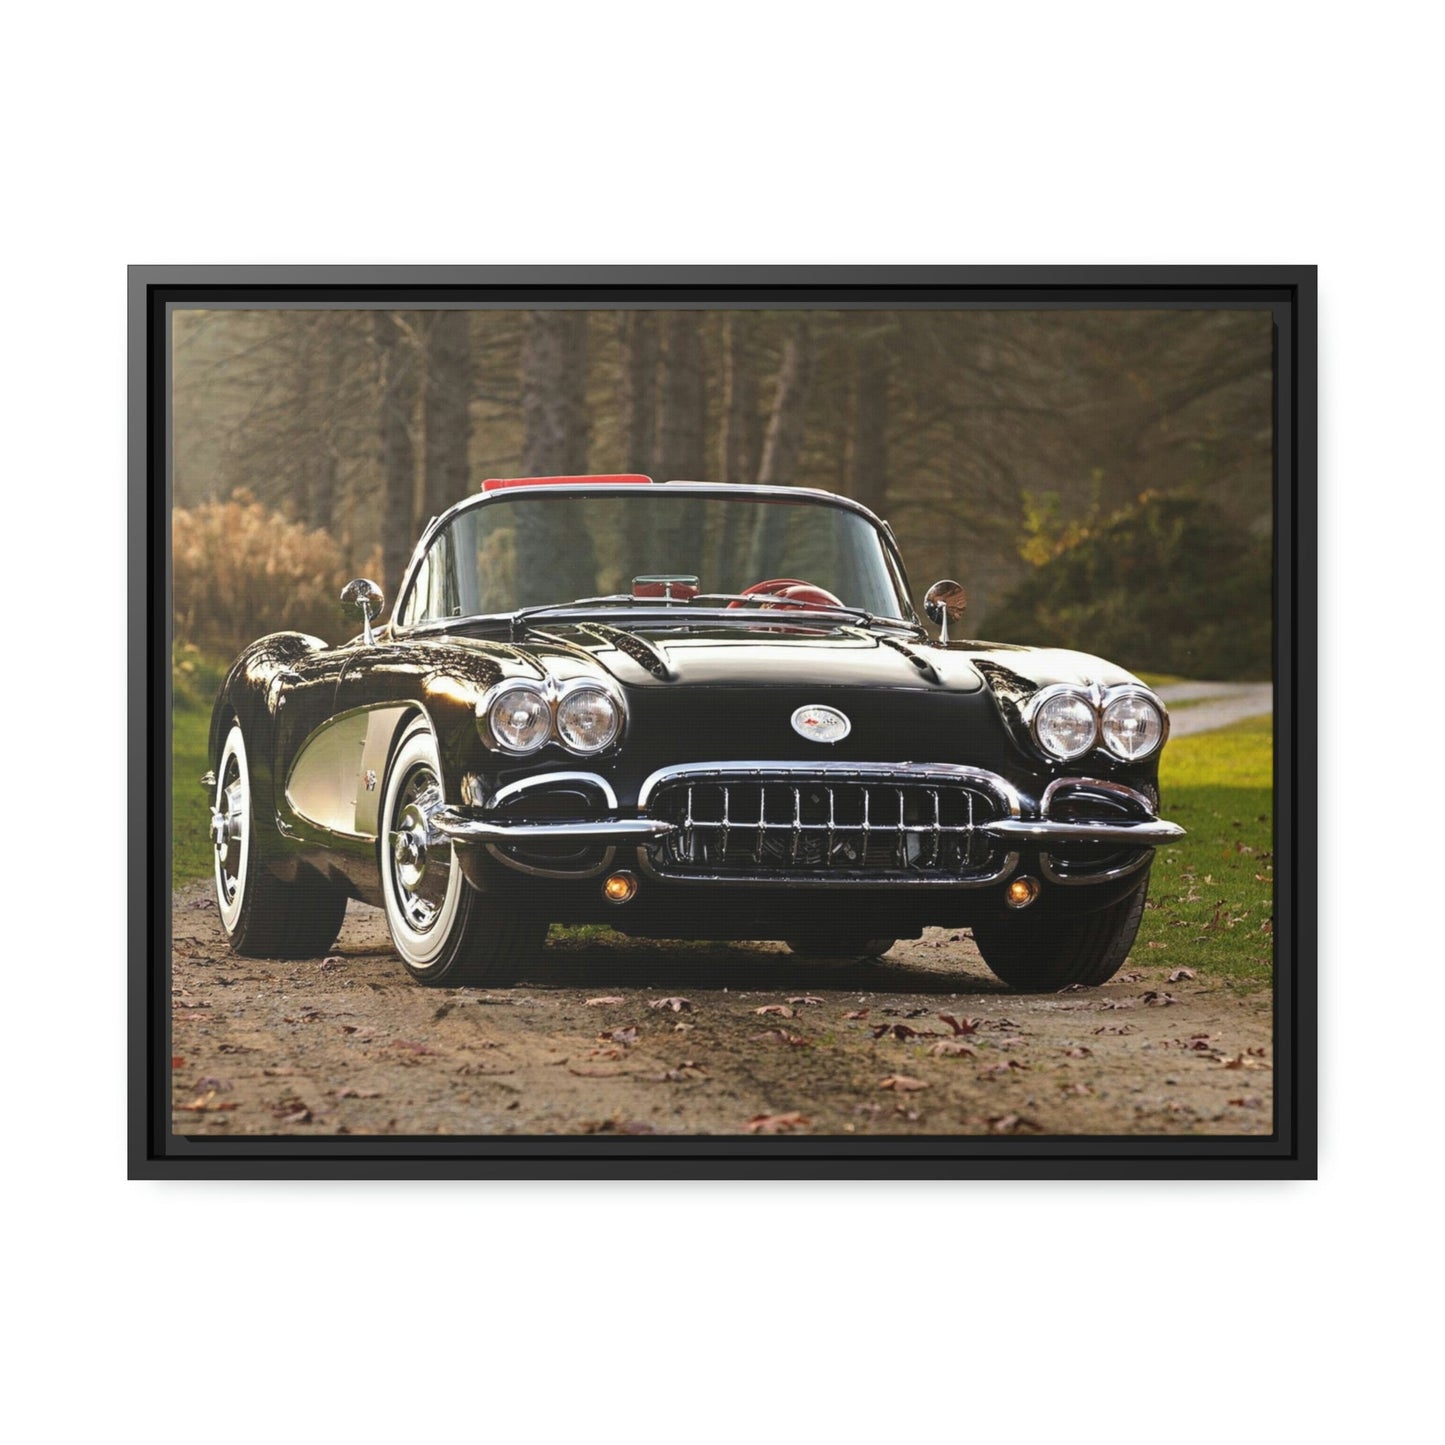 Chevy Style: Wall Art Featuring the Best of Chevrolet Design and Craftsmanship